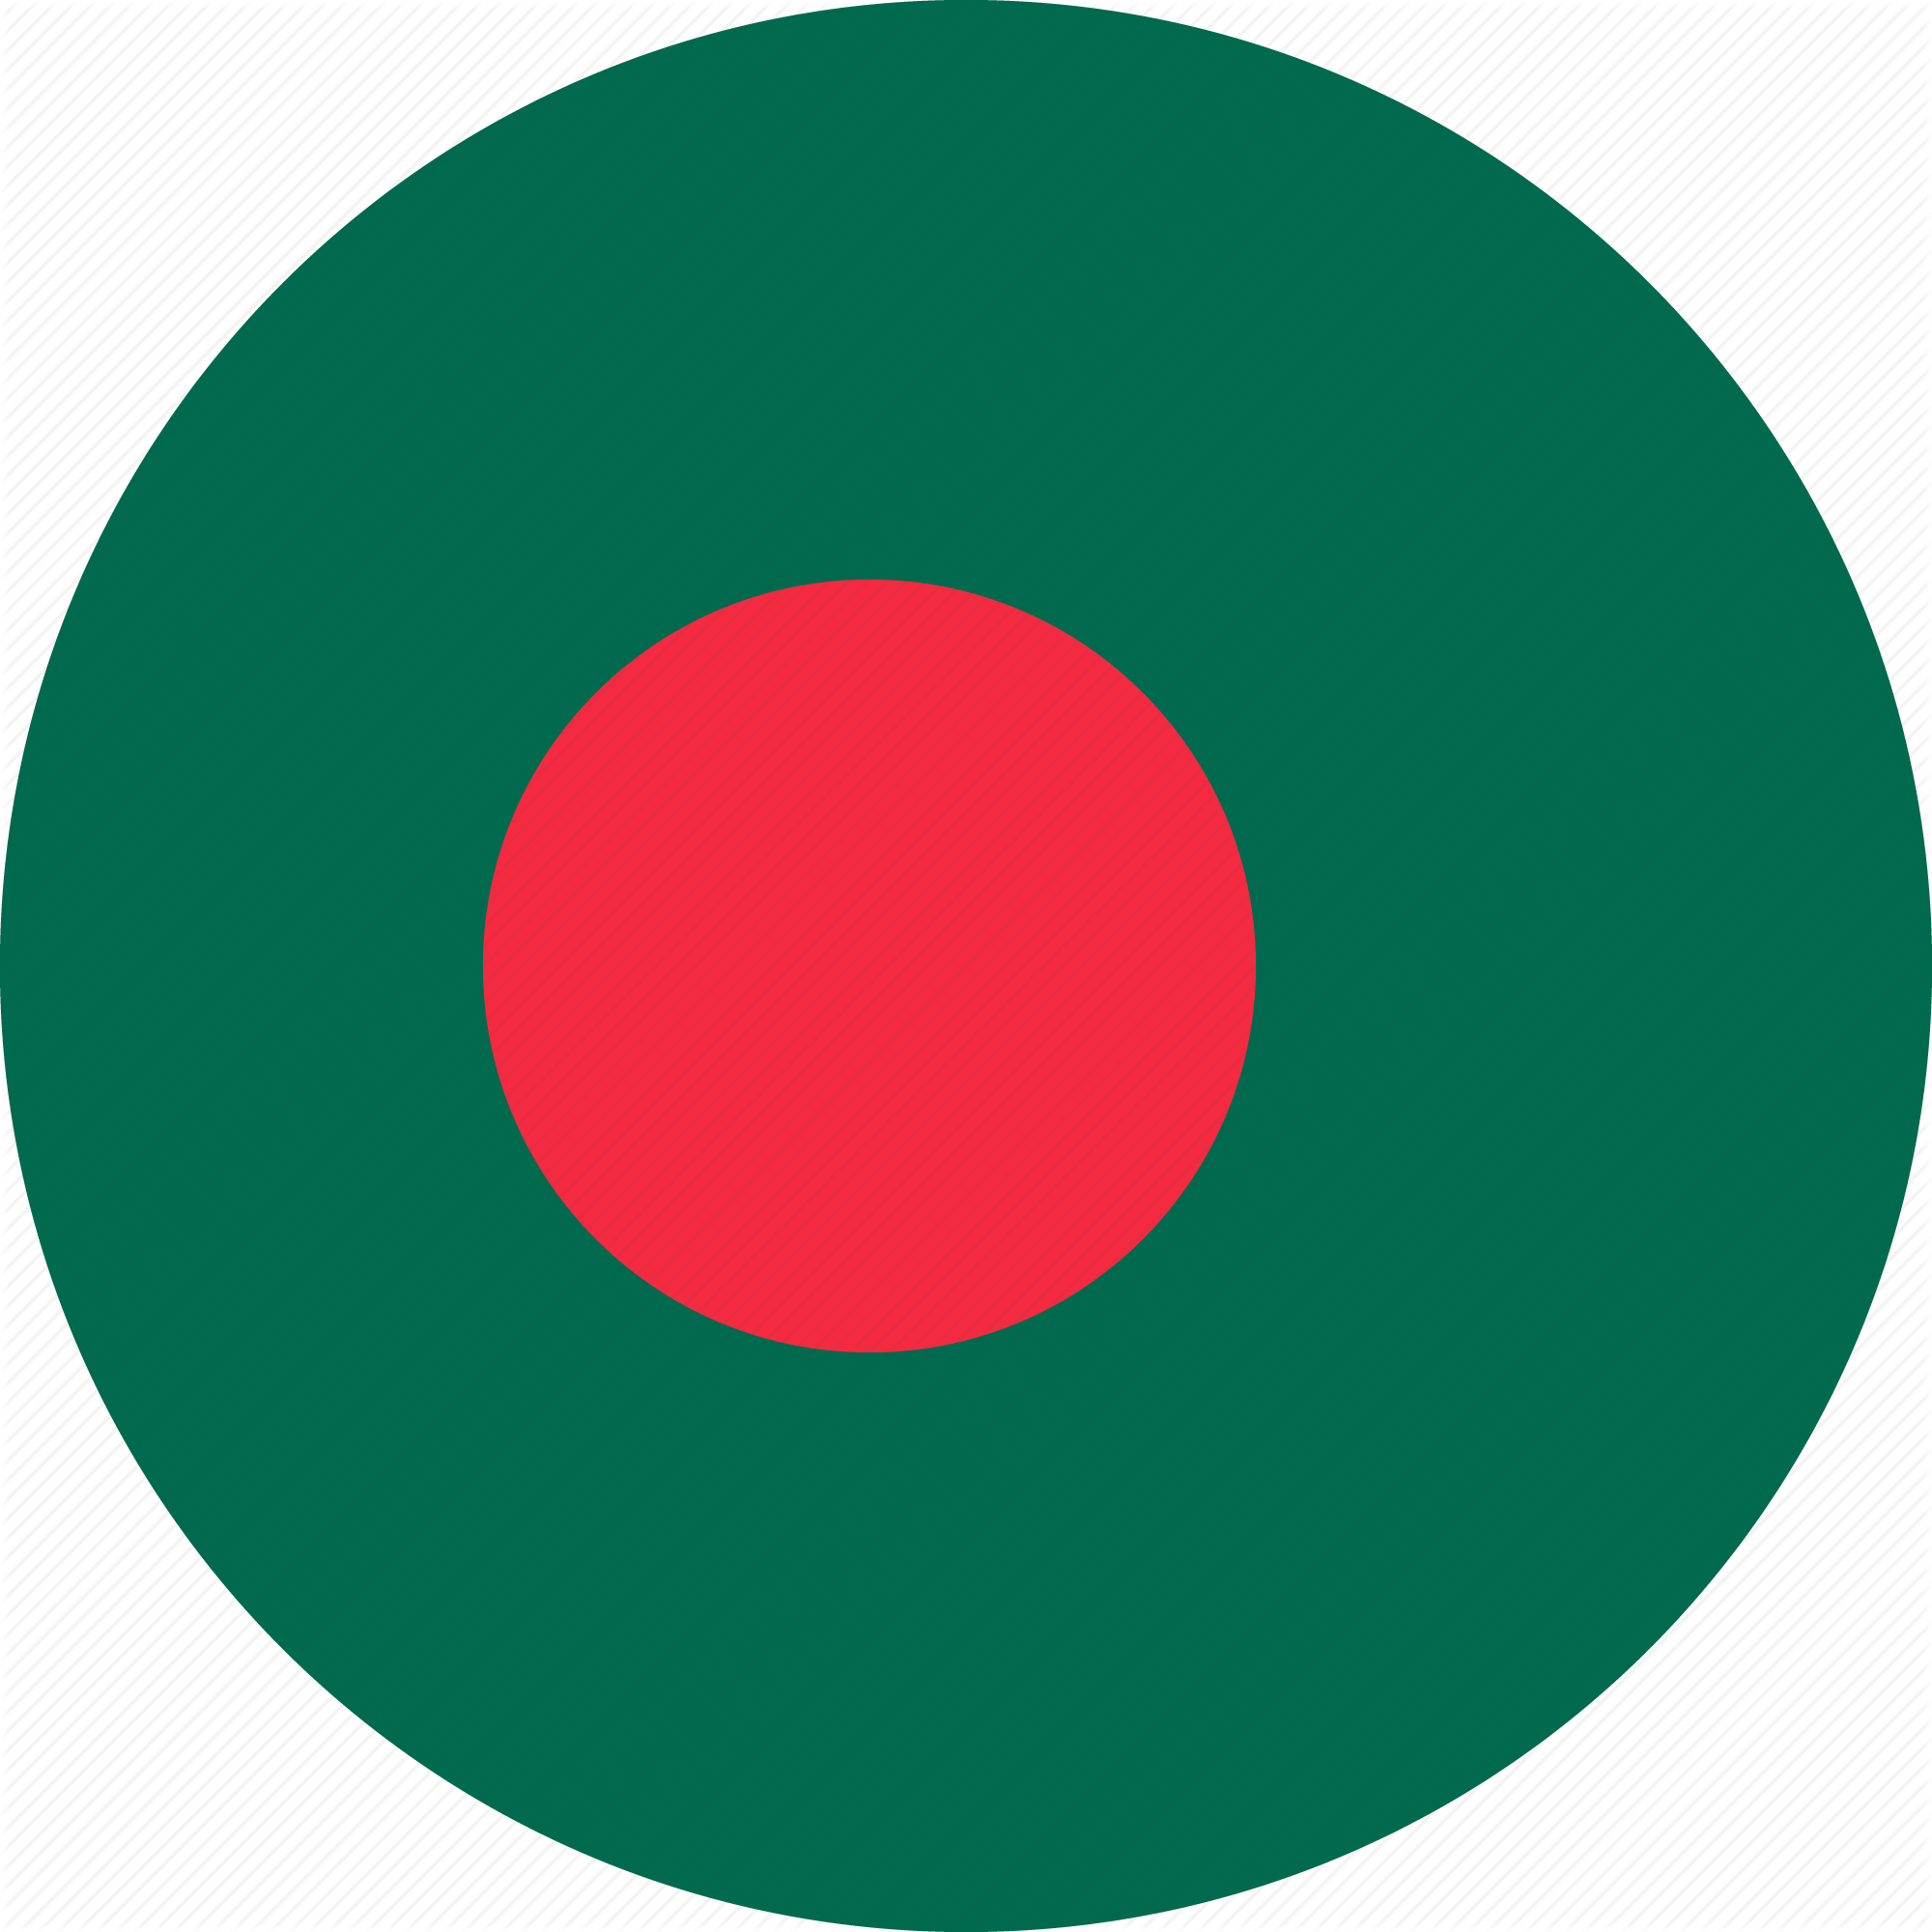 A Green Circle With A Red Circle In The Middle